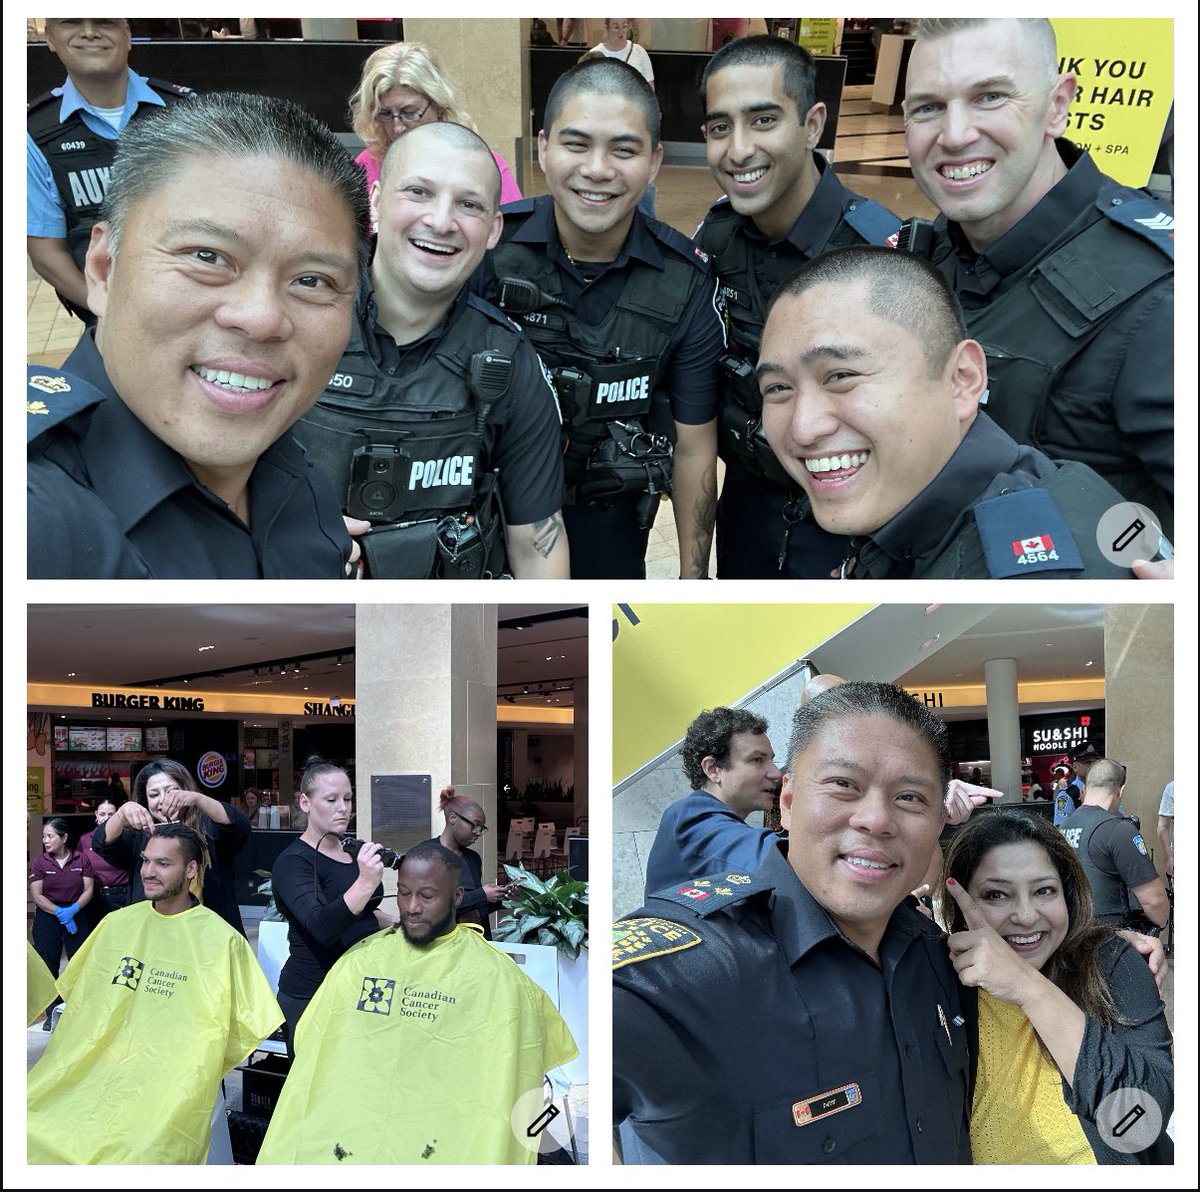 Can’t say enough about “Matteo” raising over 2 G’s for #Cops4Cancer. Our #PRP members & community that participated, supported & volunteered really made this day special in support of paediatric cancer research!